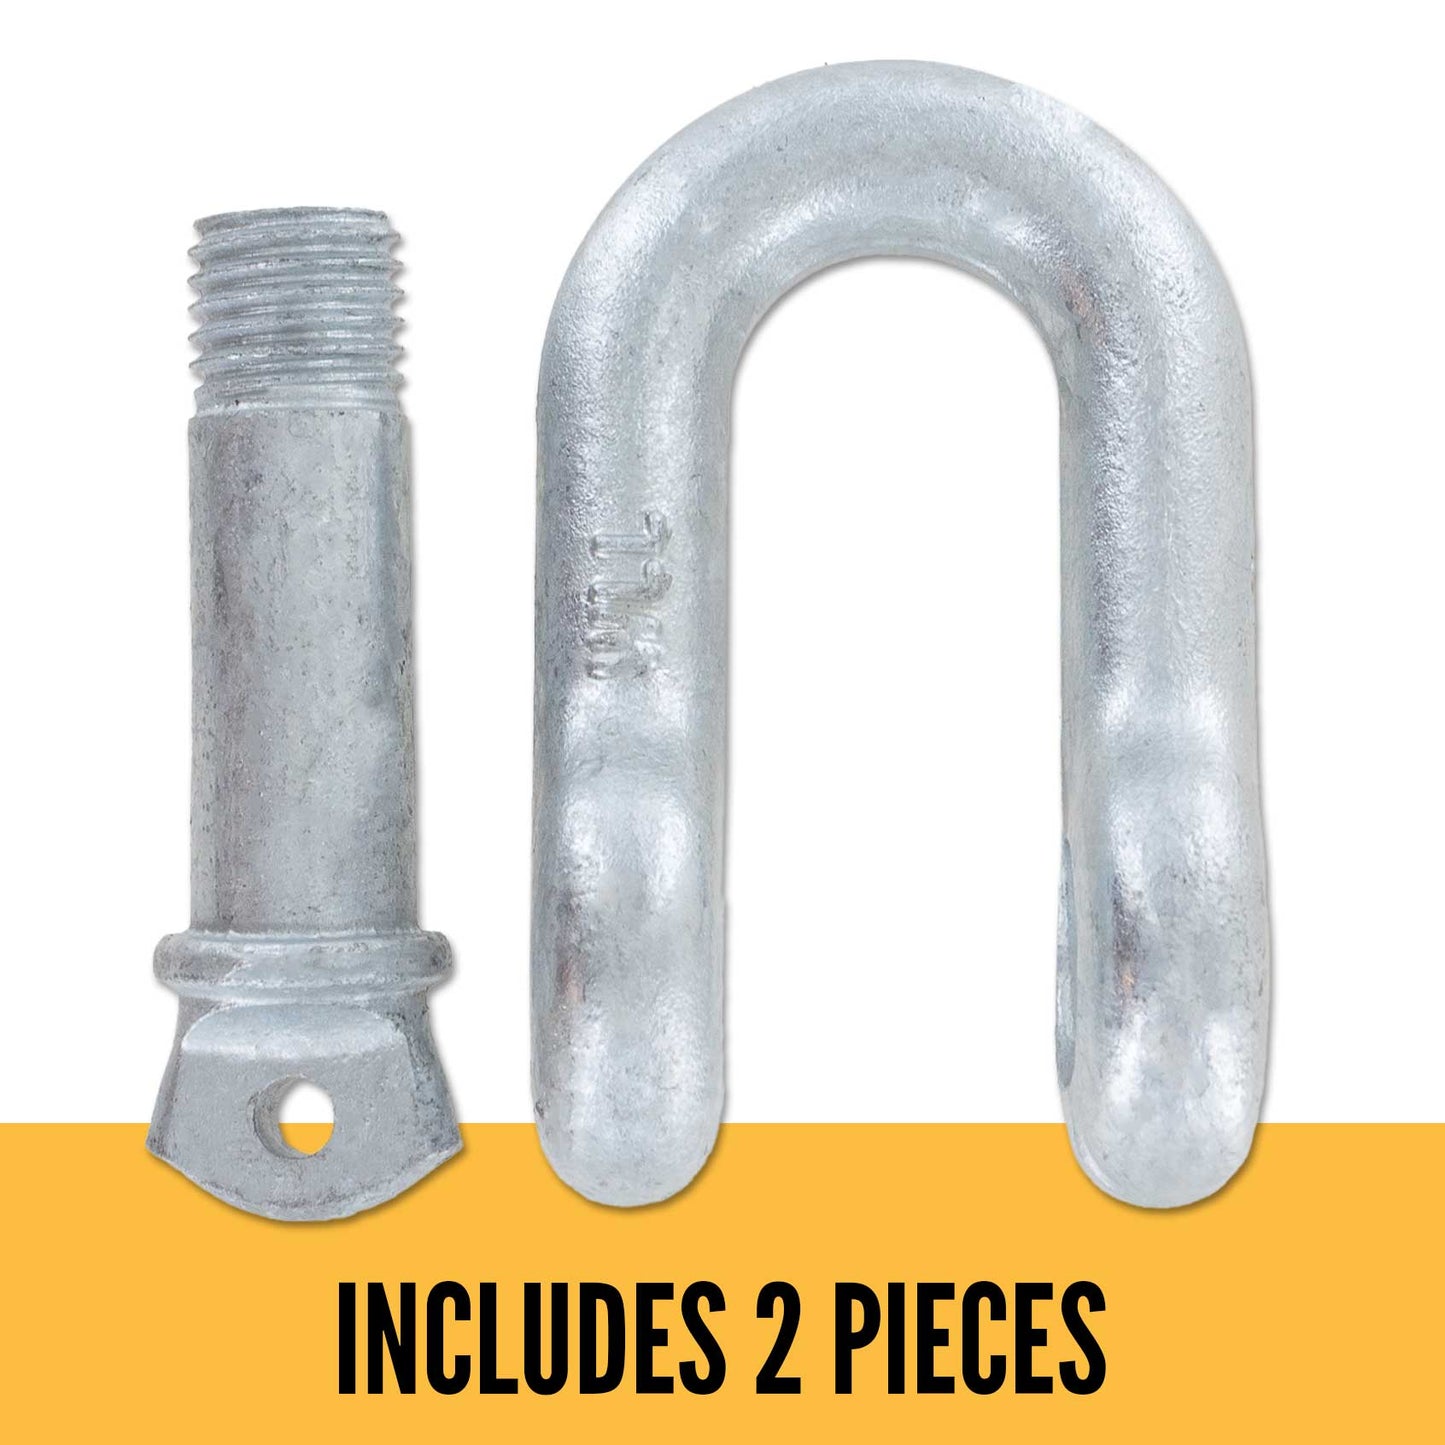 5/16" Galvanized Screw Pin Chain Shackle - 0.75 Ton parts of a shackle